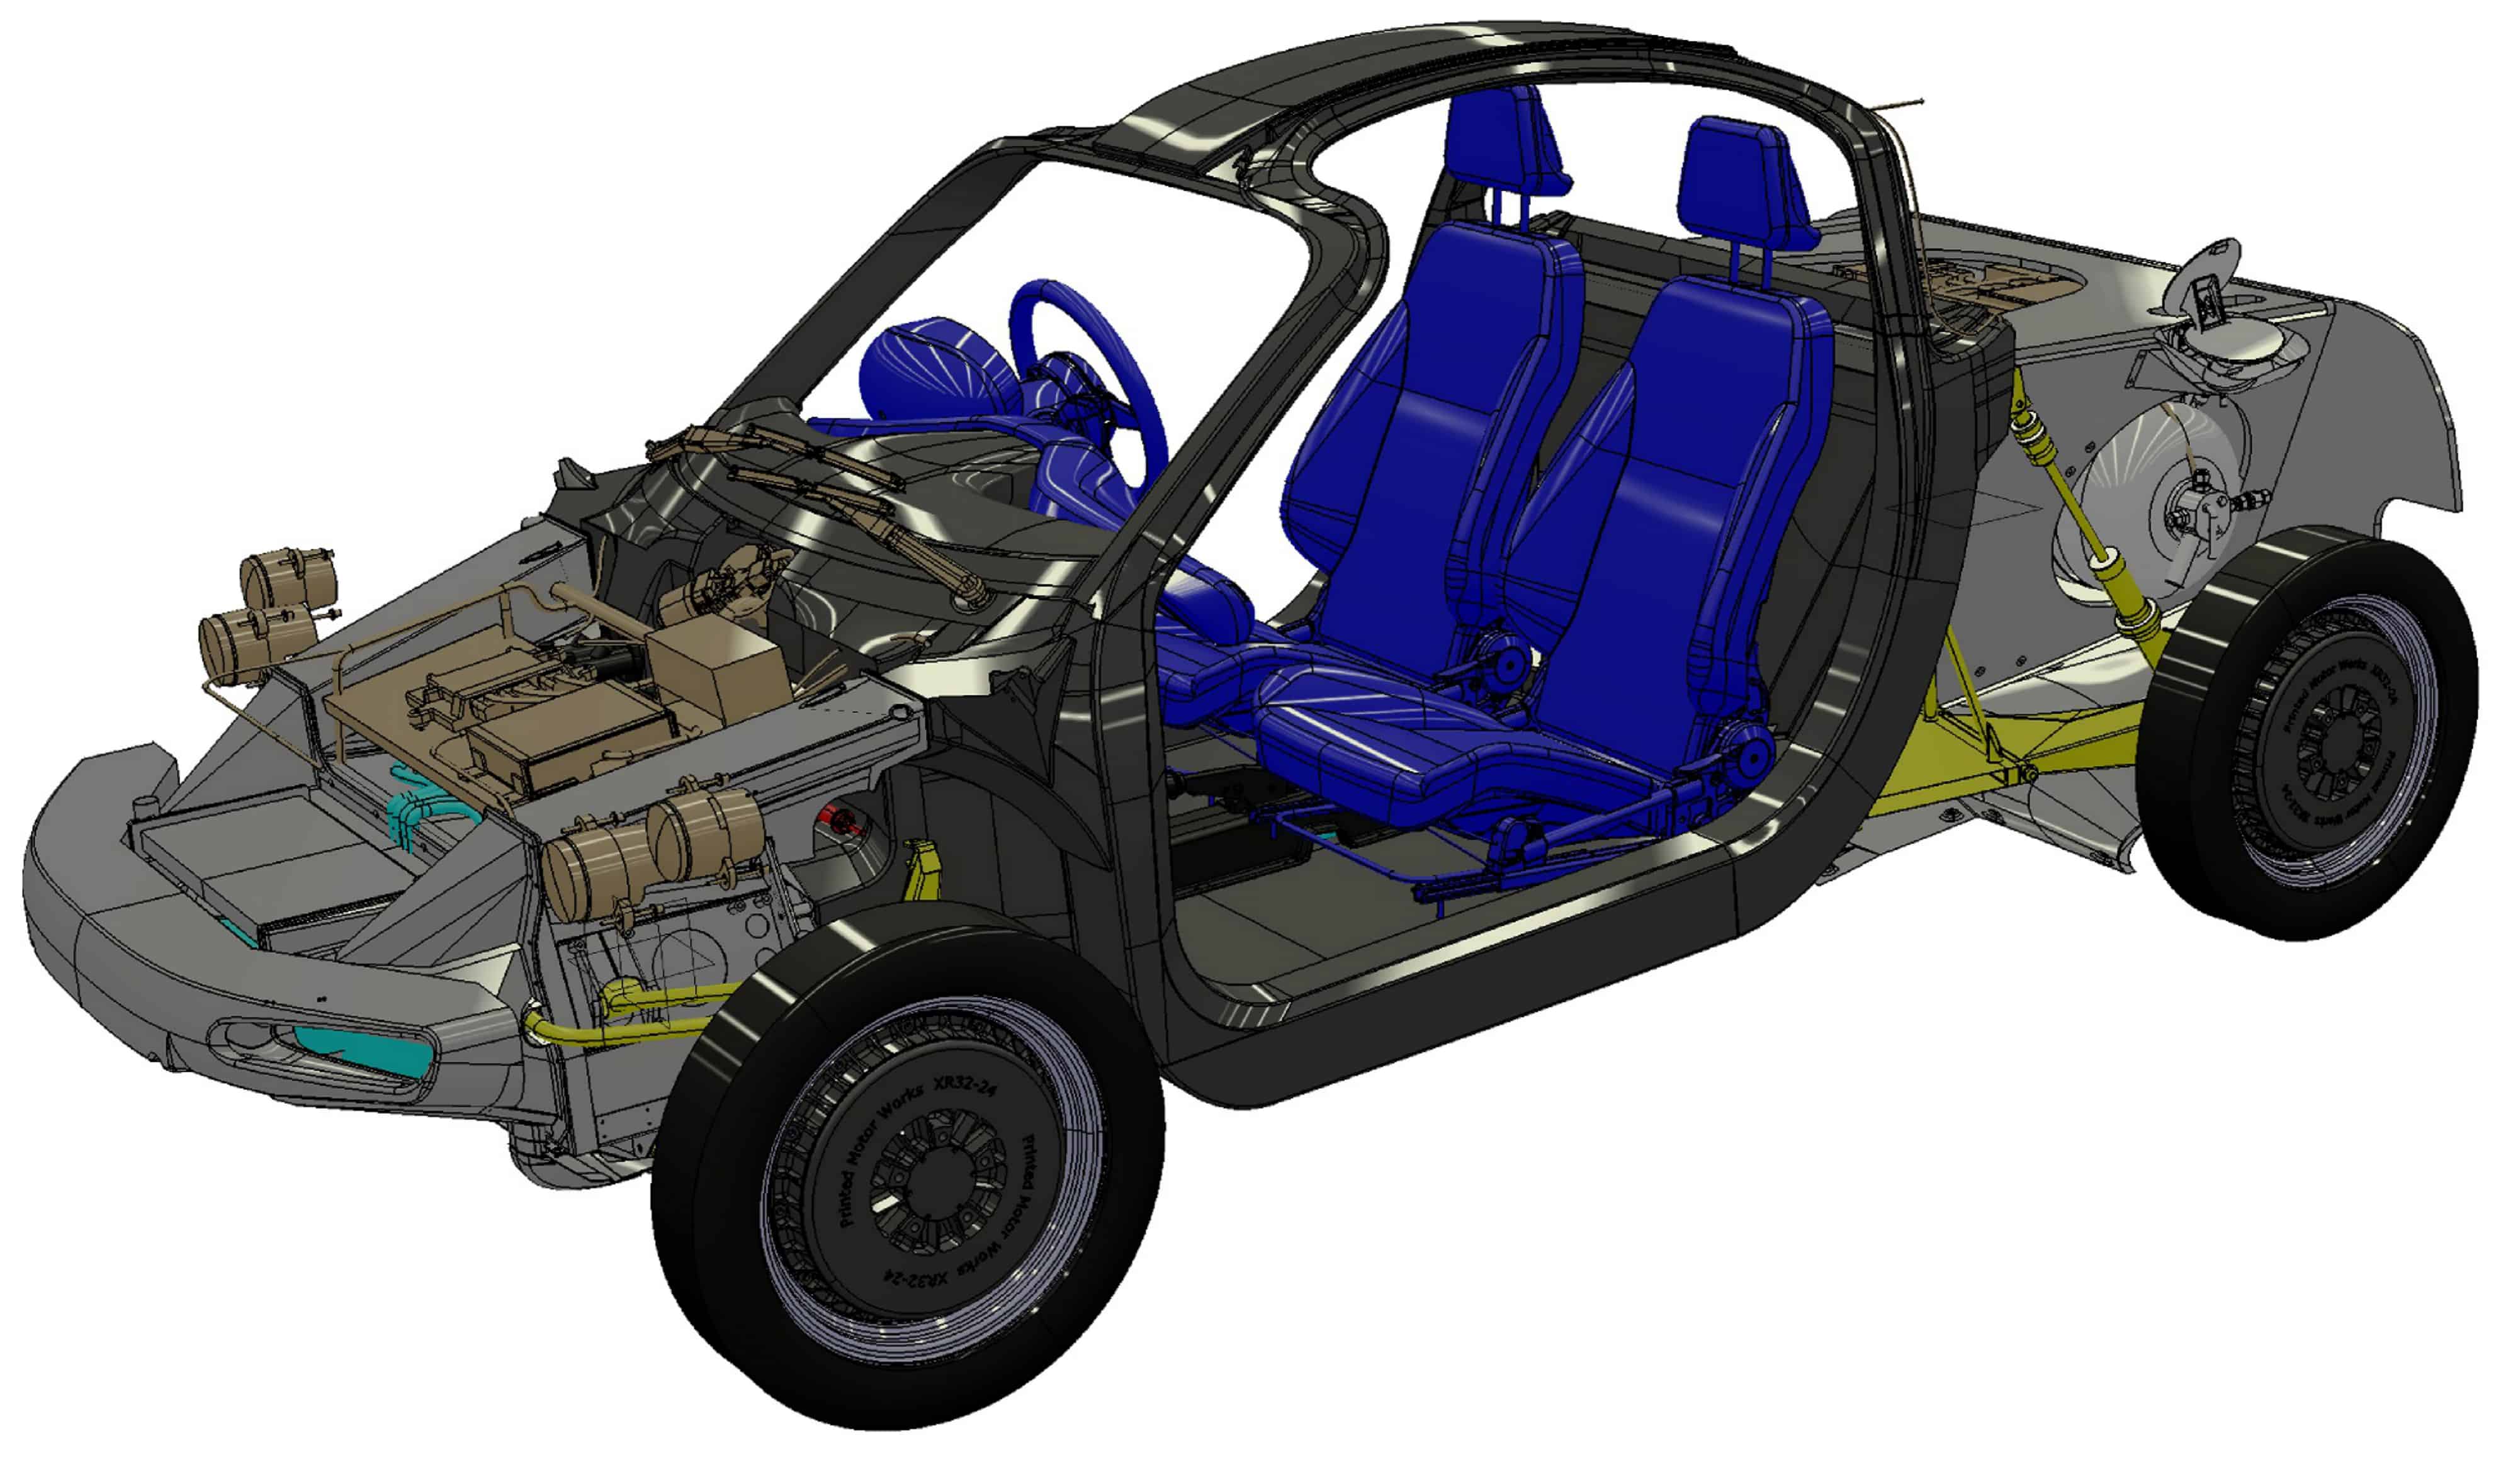 The riversipl car has a revolutionary design, based around a fuel cell and wheel-hub motors